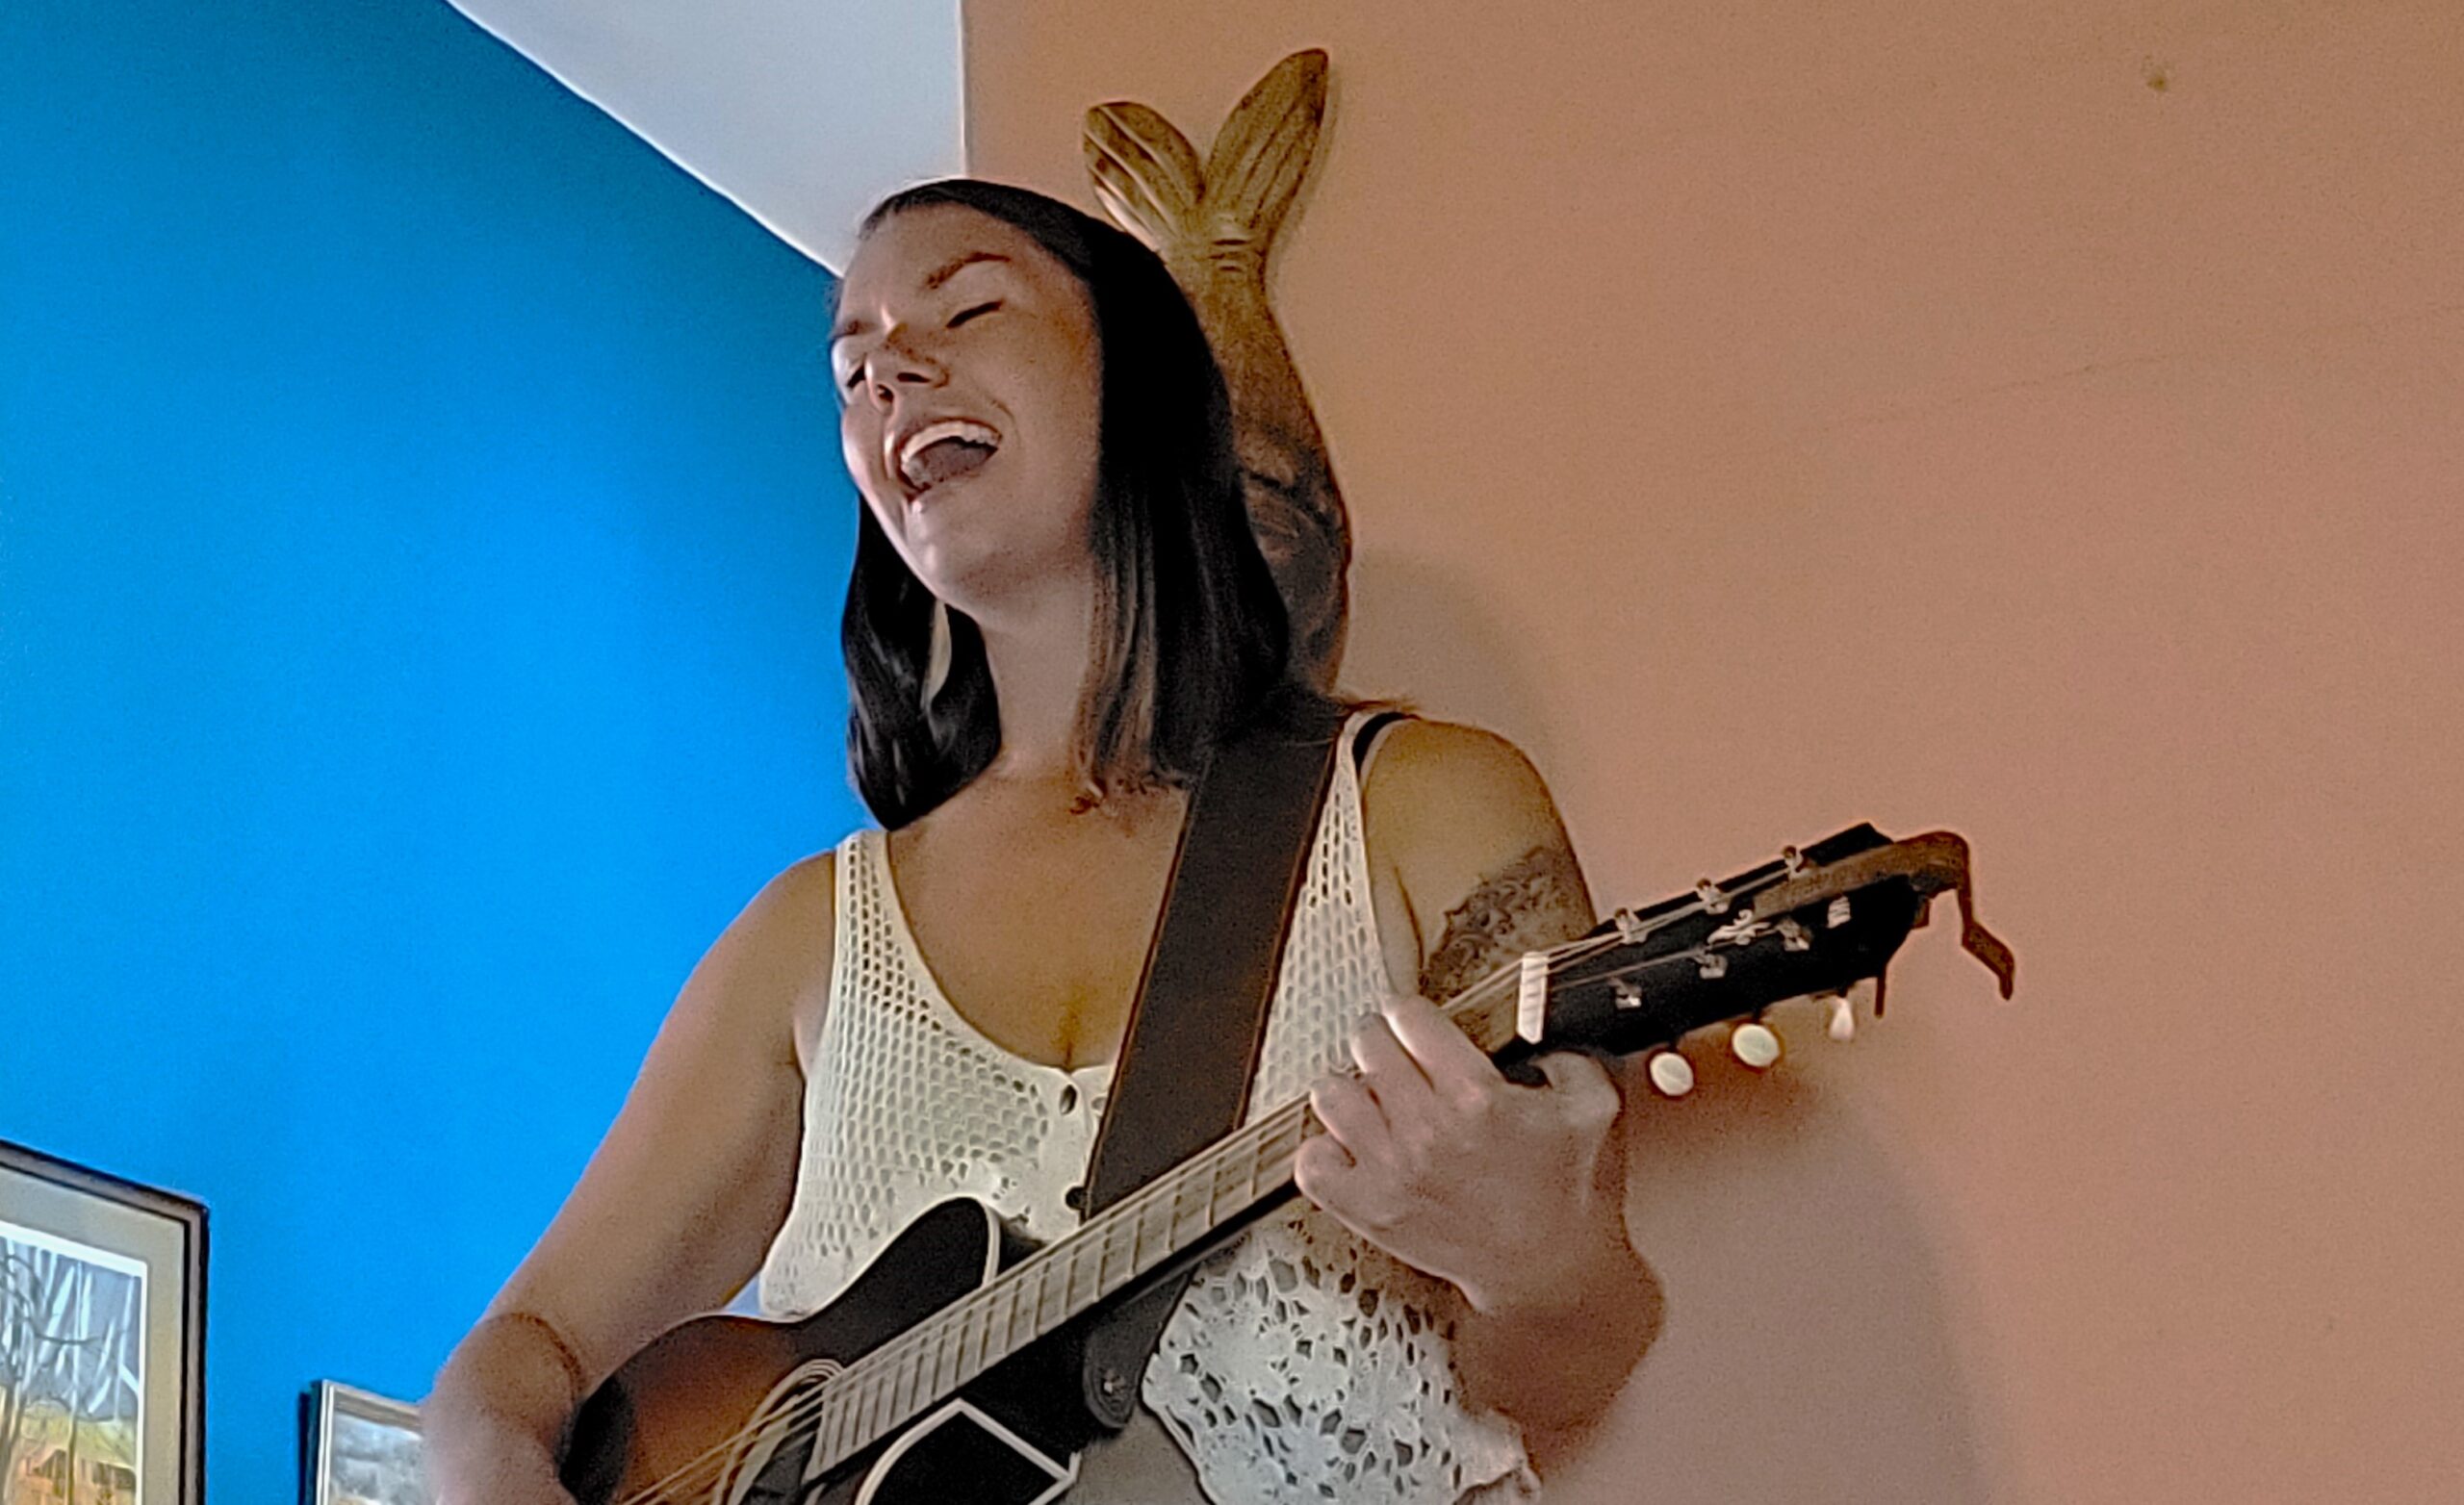 Through a chance meeting at a party, I found myself invited to a local house concert by a young, emerging singer from Joshua Tree California. She was visiting her godmother in Ajijic, who decided to showcase her to a few of her music-loving friends in town.